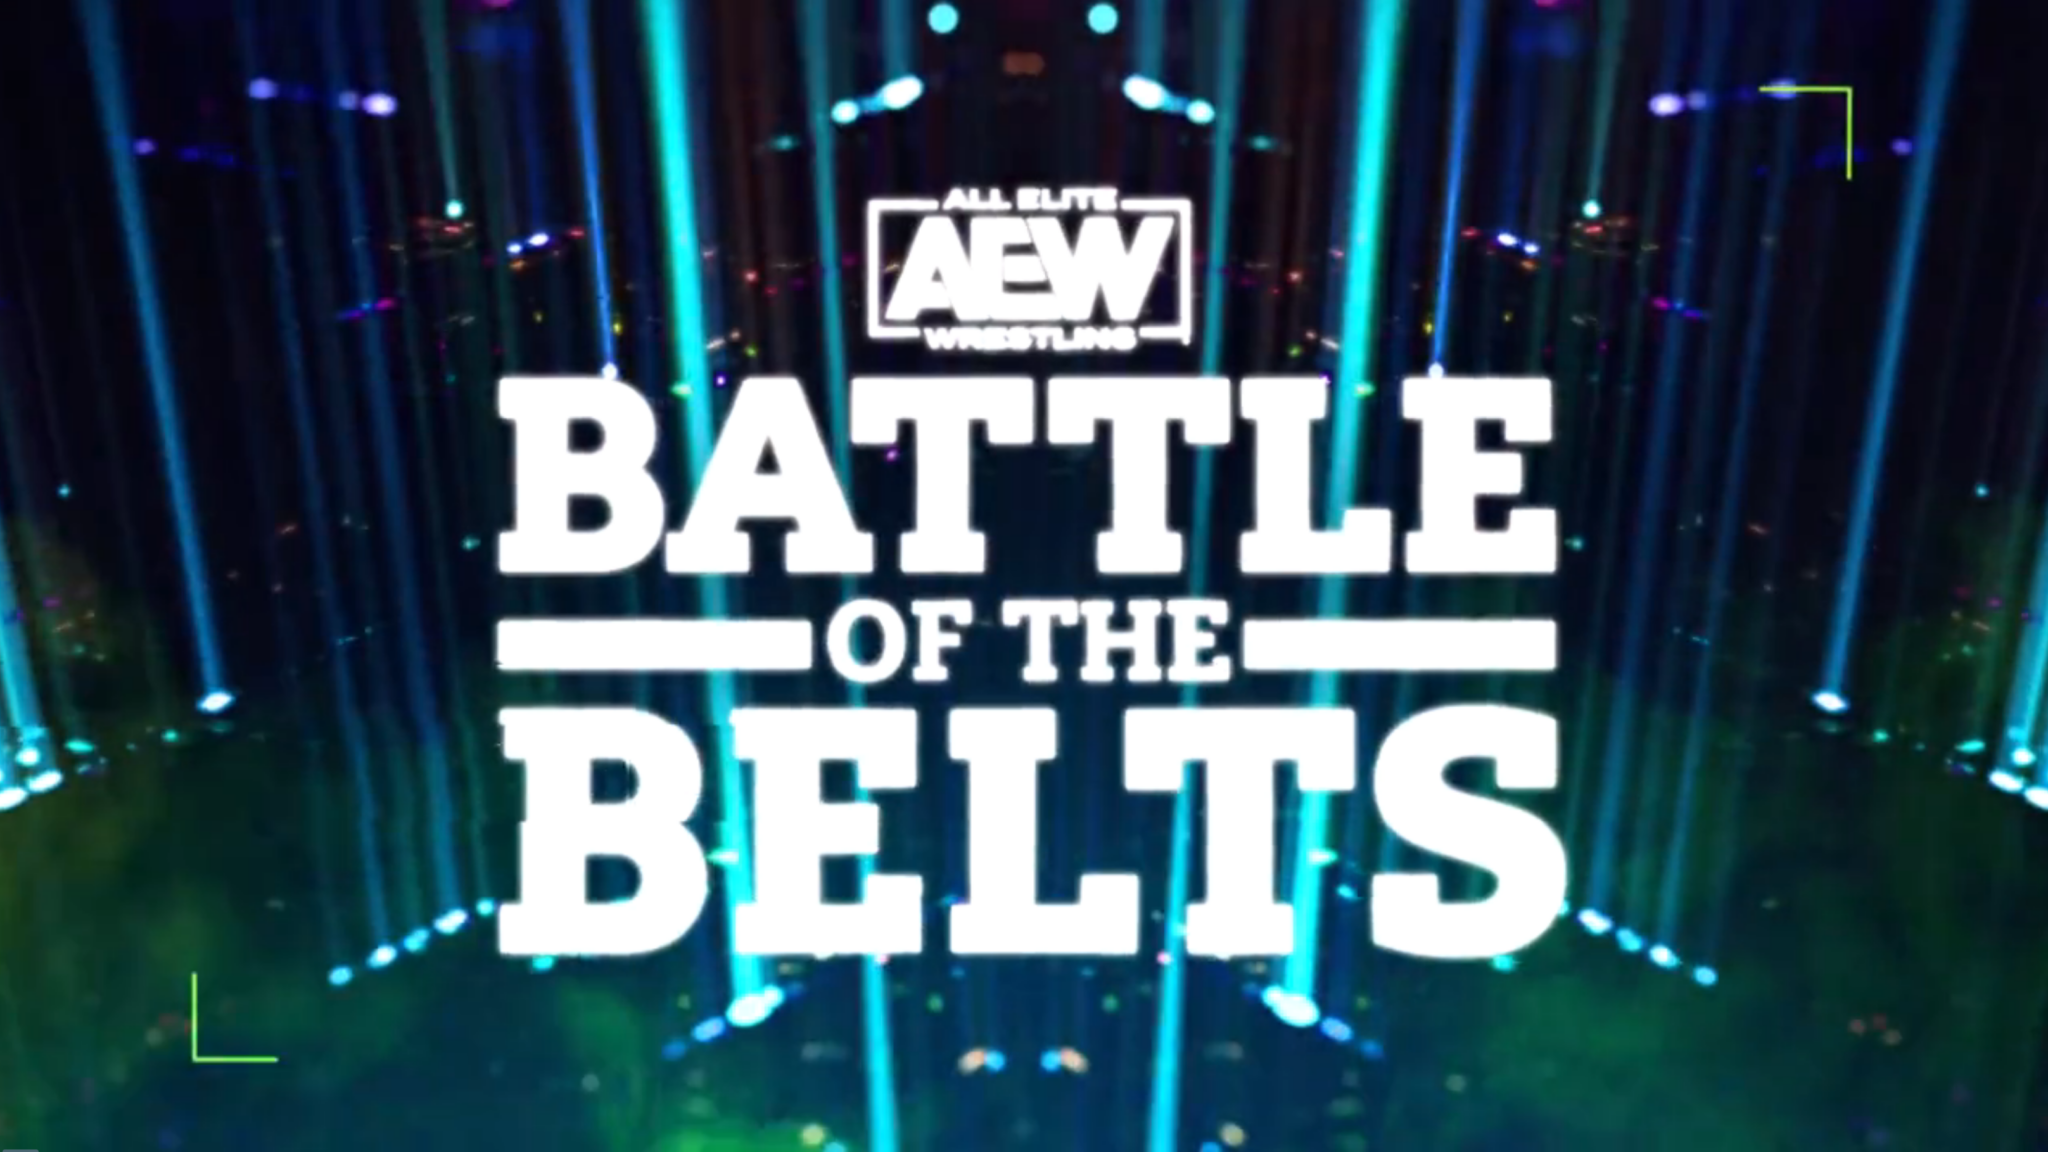 AEW Announces Date And Location Of Their Battle Of The Belts VI Event